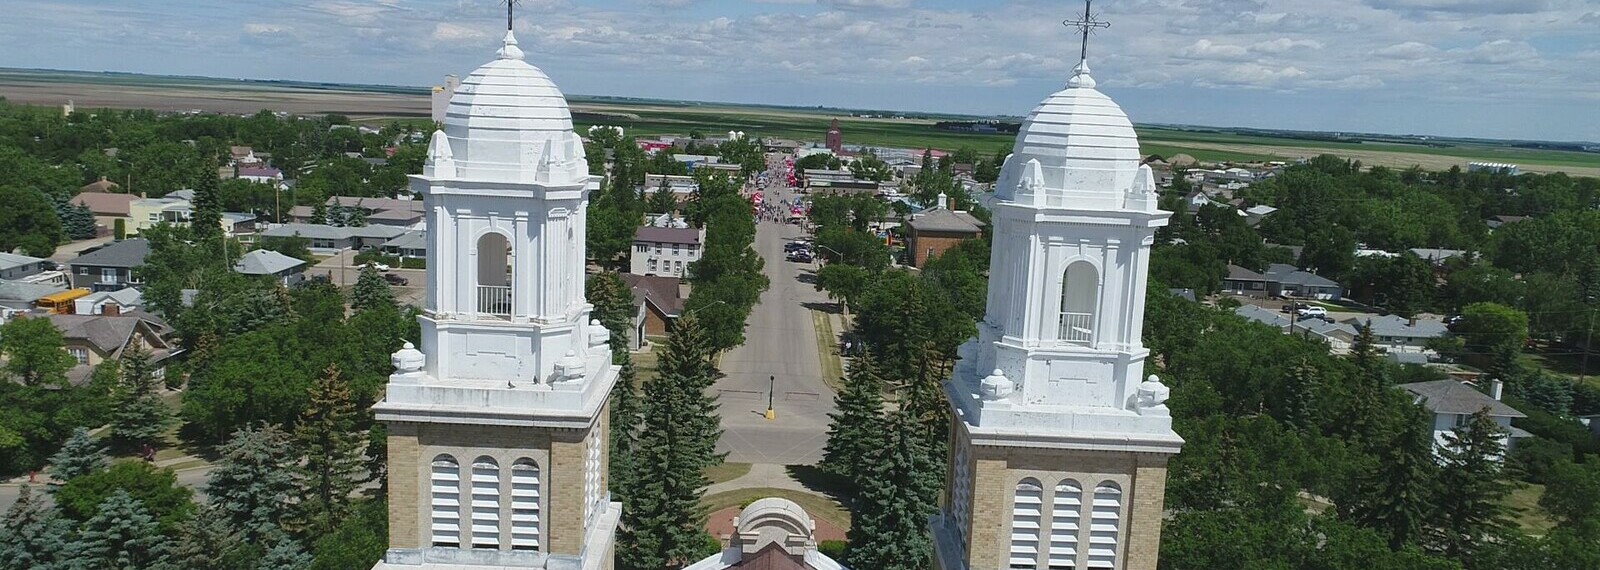 About Gravelbourg